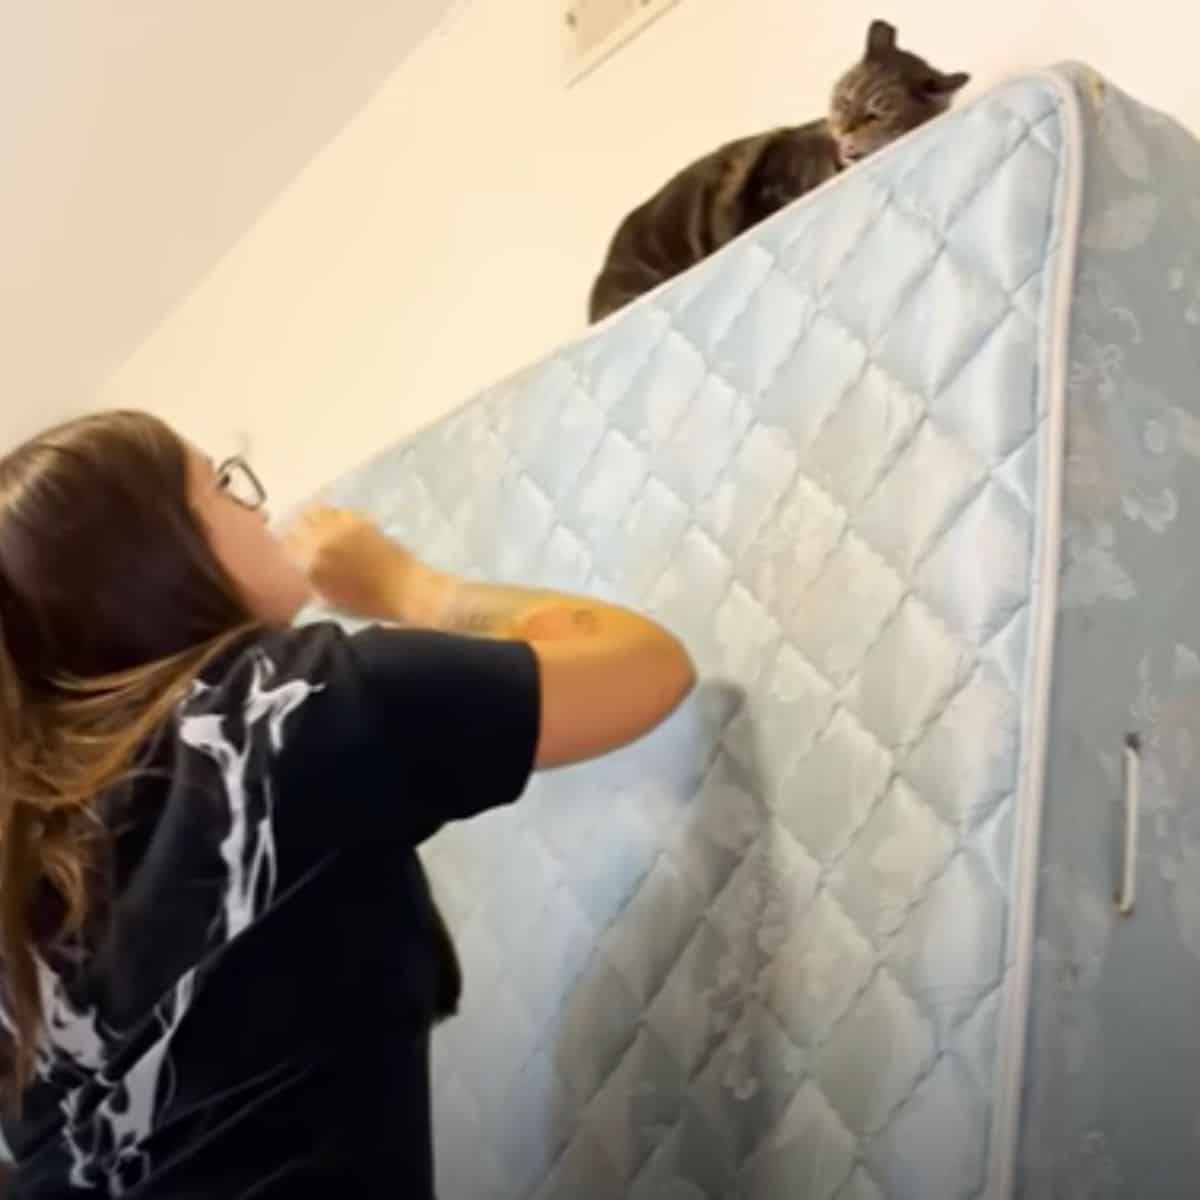 woman looking at cat on top of mattress